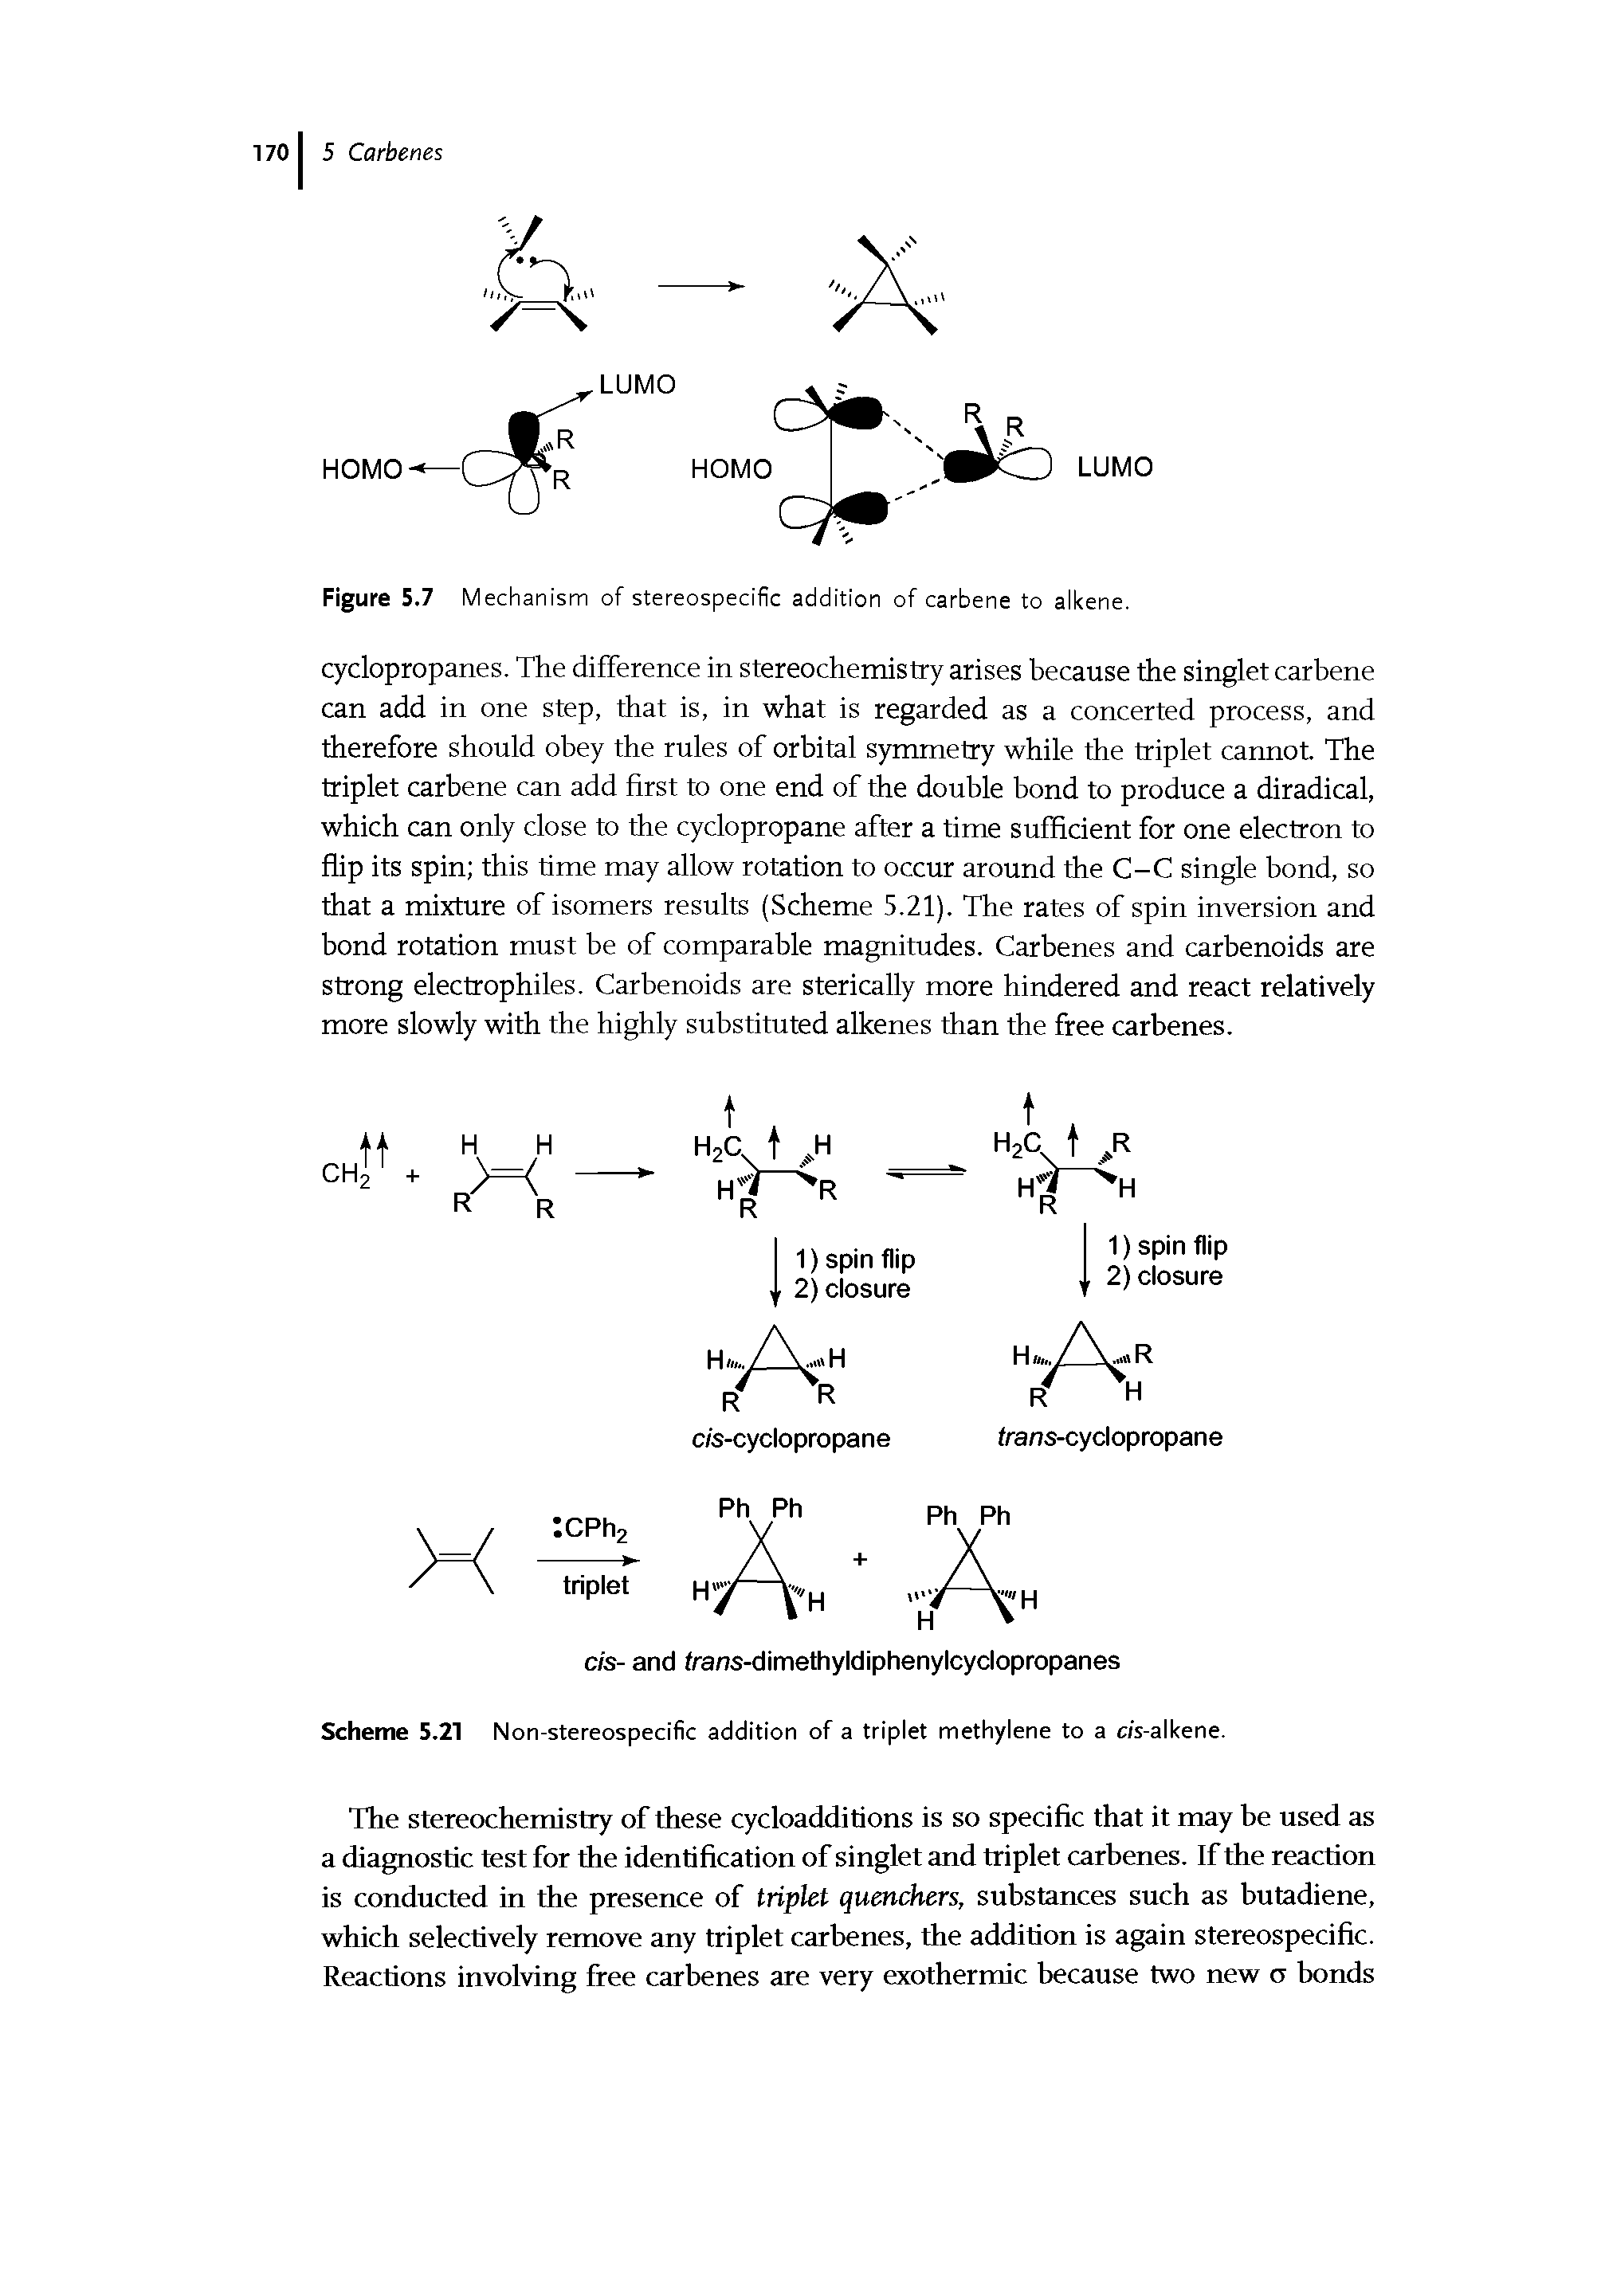 Figure S.7 Mechanism of stereospecific addition of carbene to alkene.